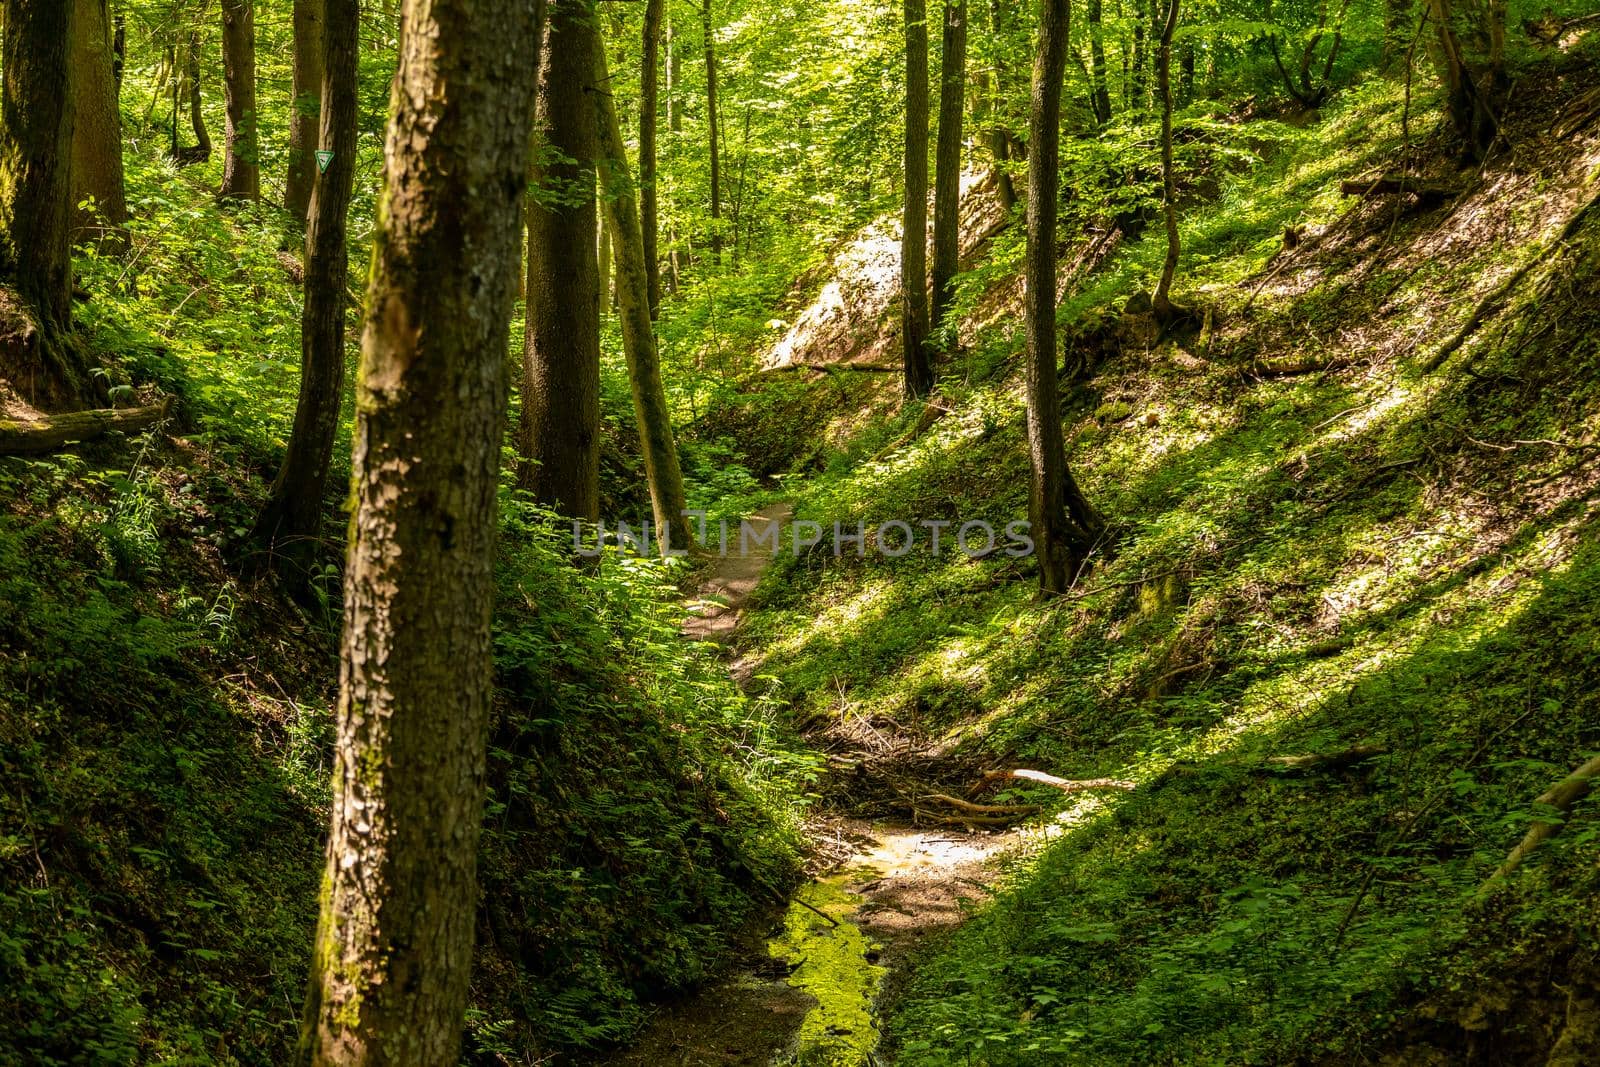 Hiking trail though the Palatinate forest nearby Pirmasens, Germany 